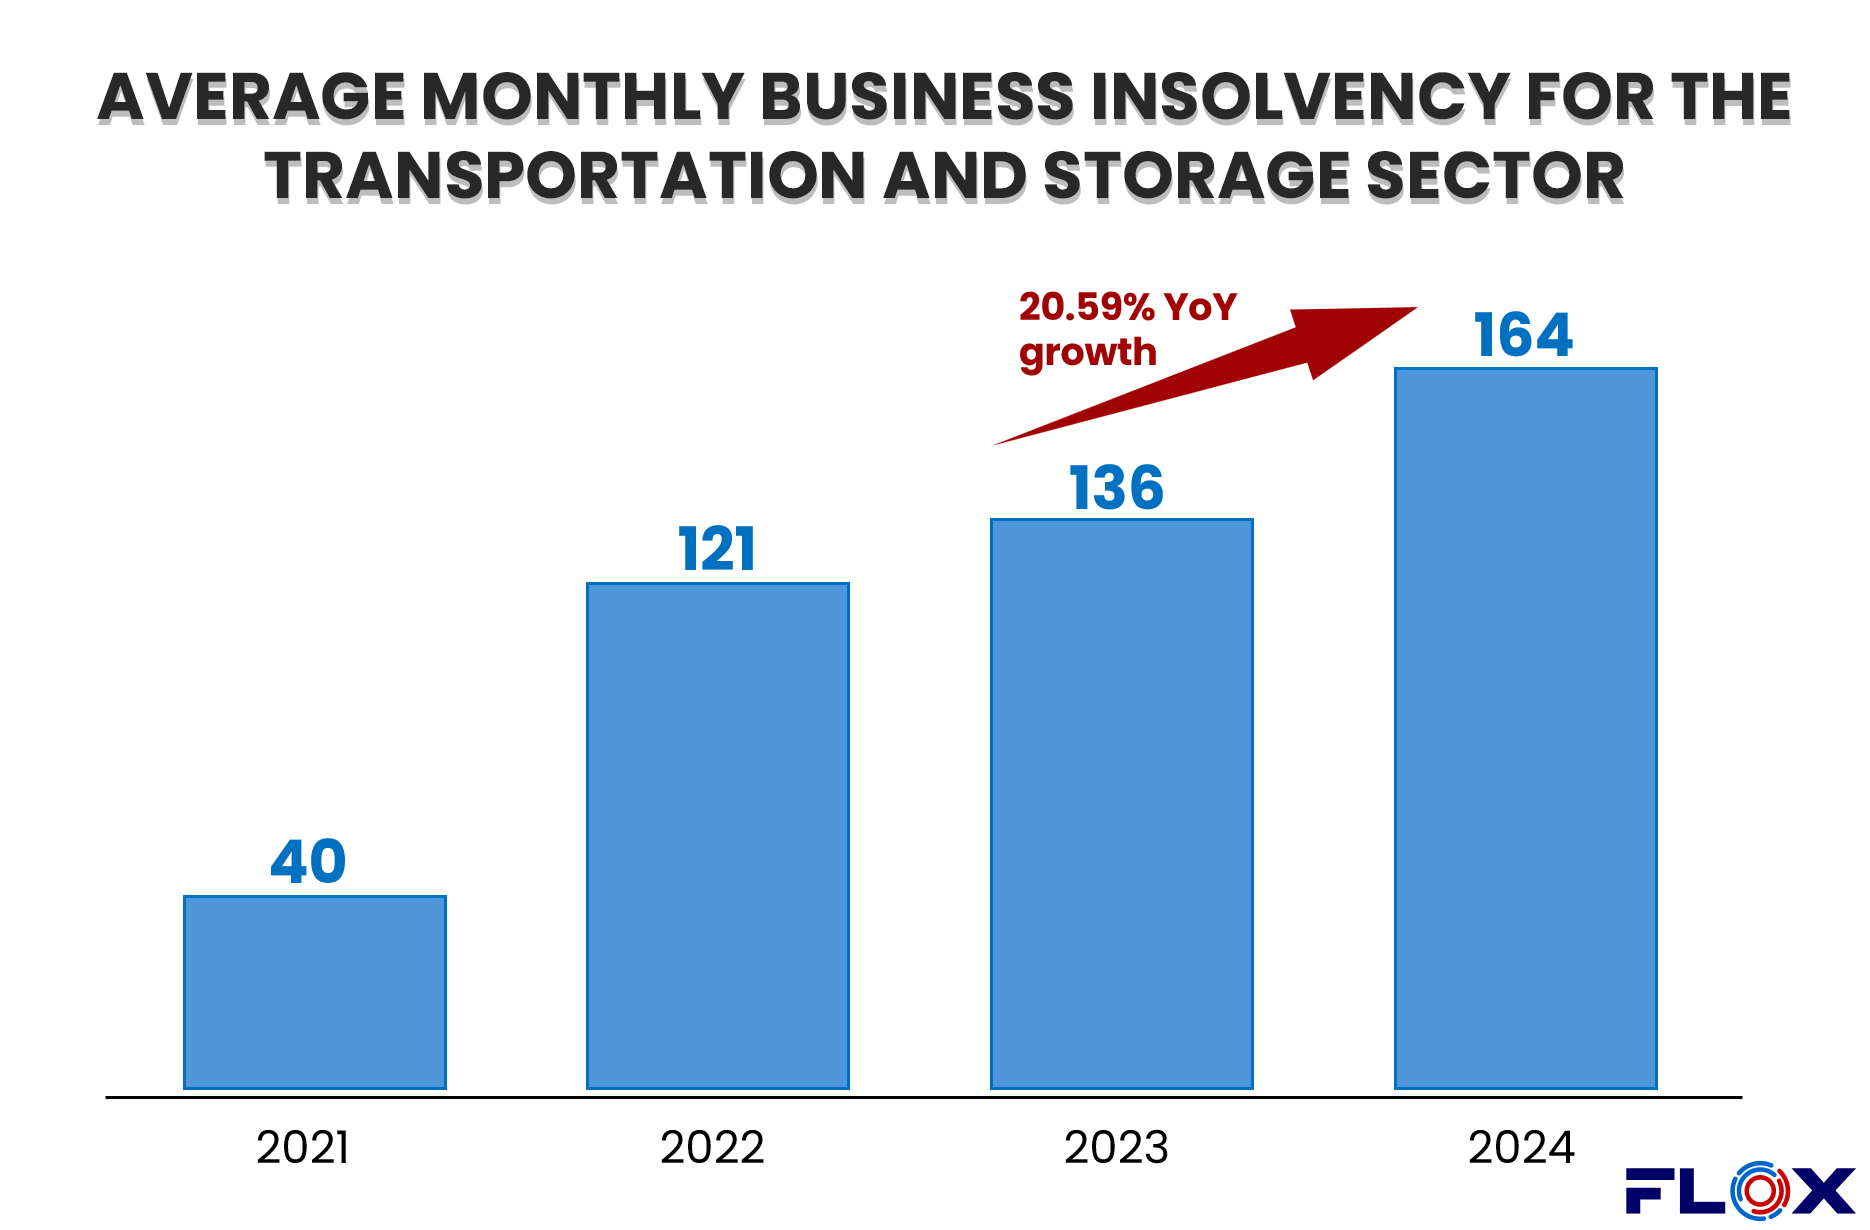 FLOX Average monthly business insolvency for the Transportation and Storage Sector 2024